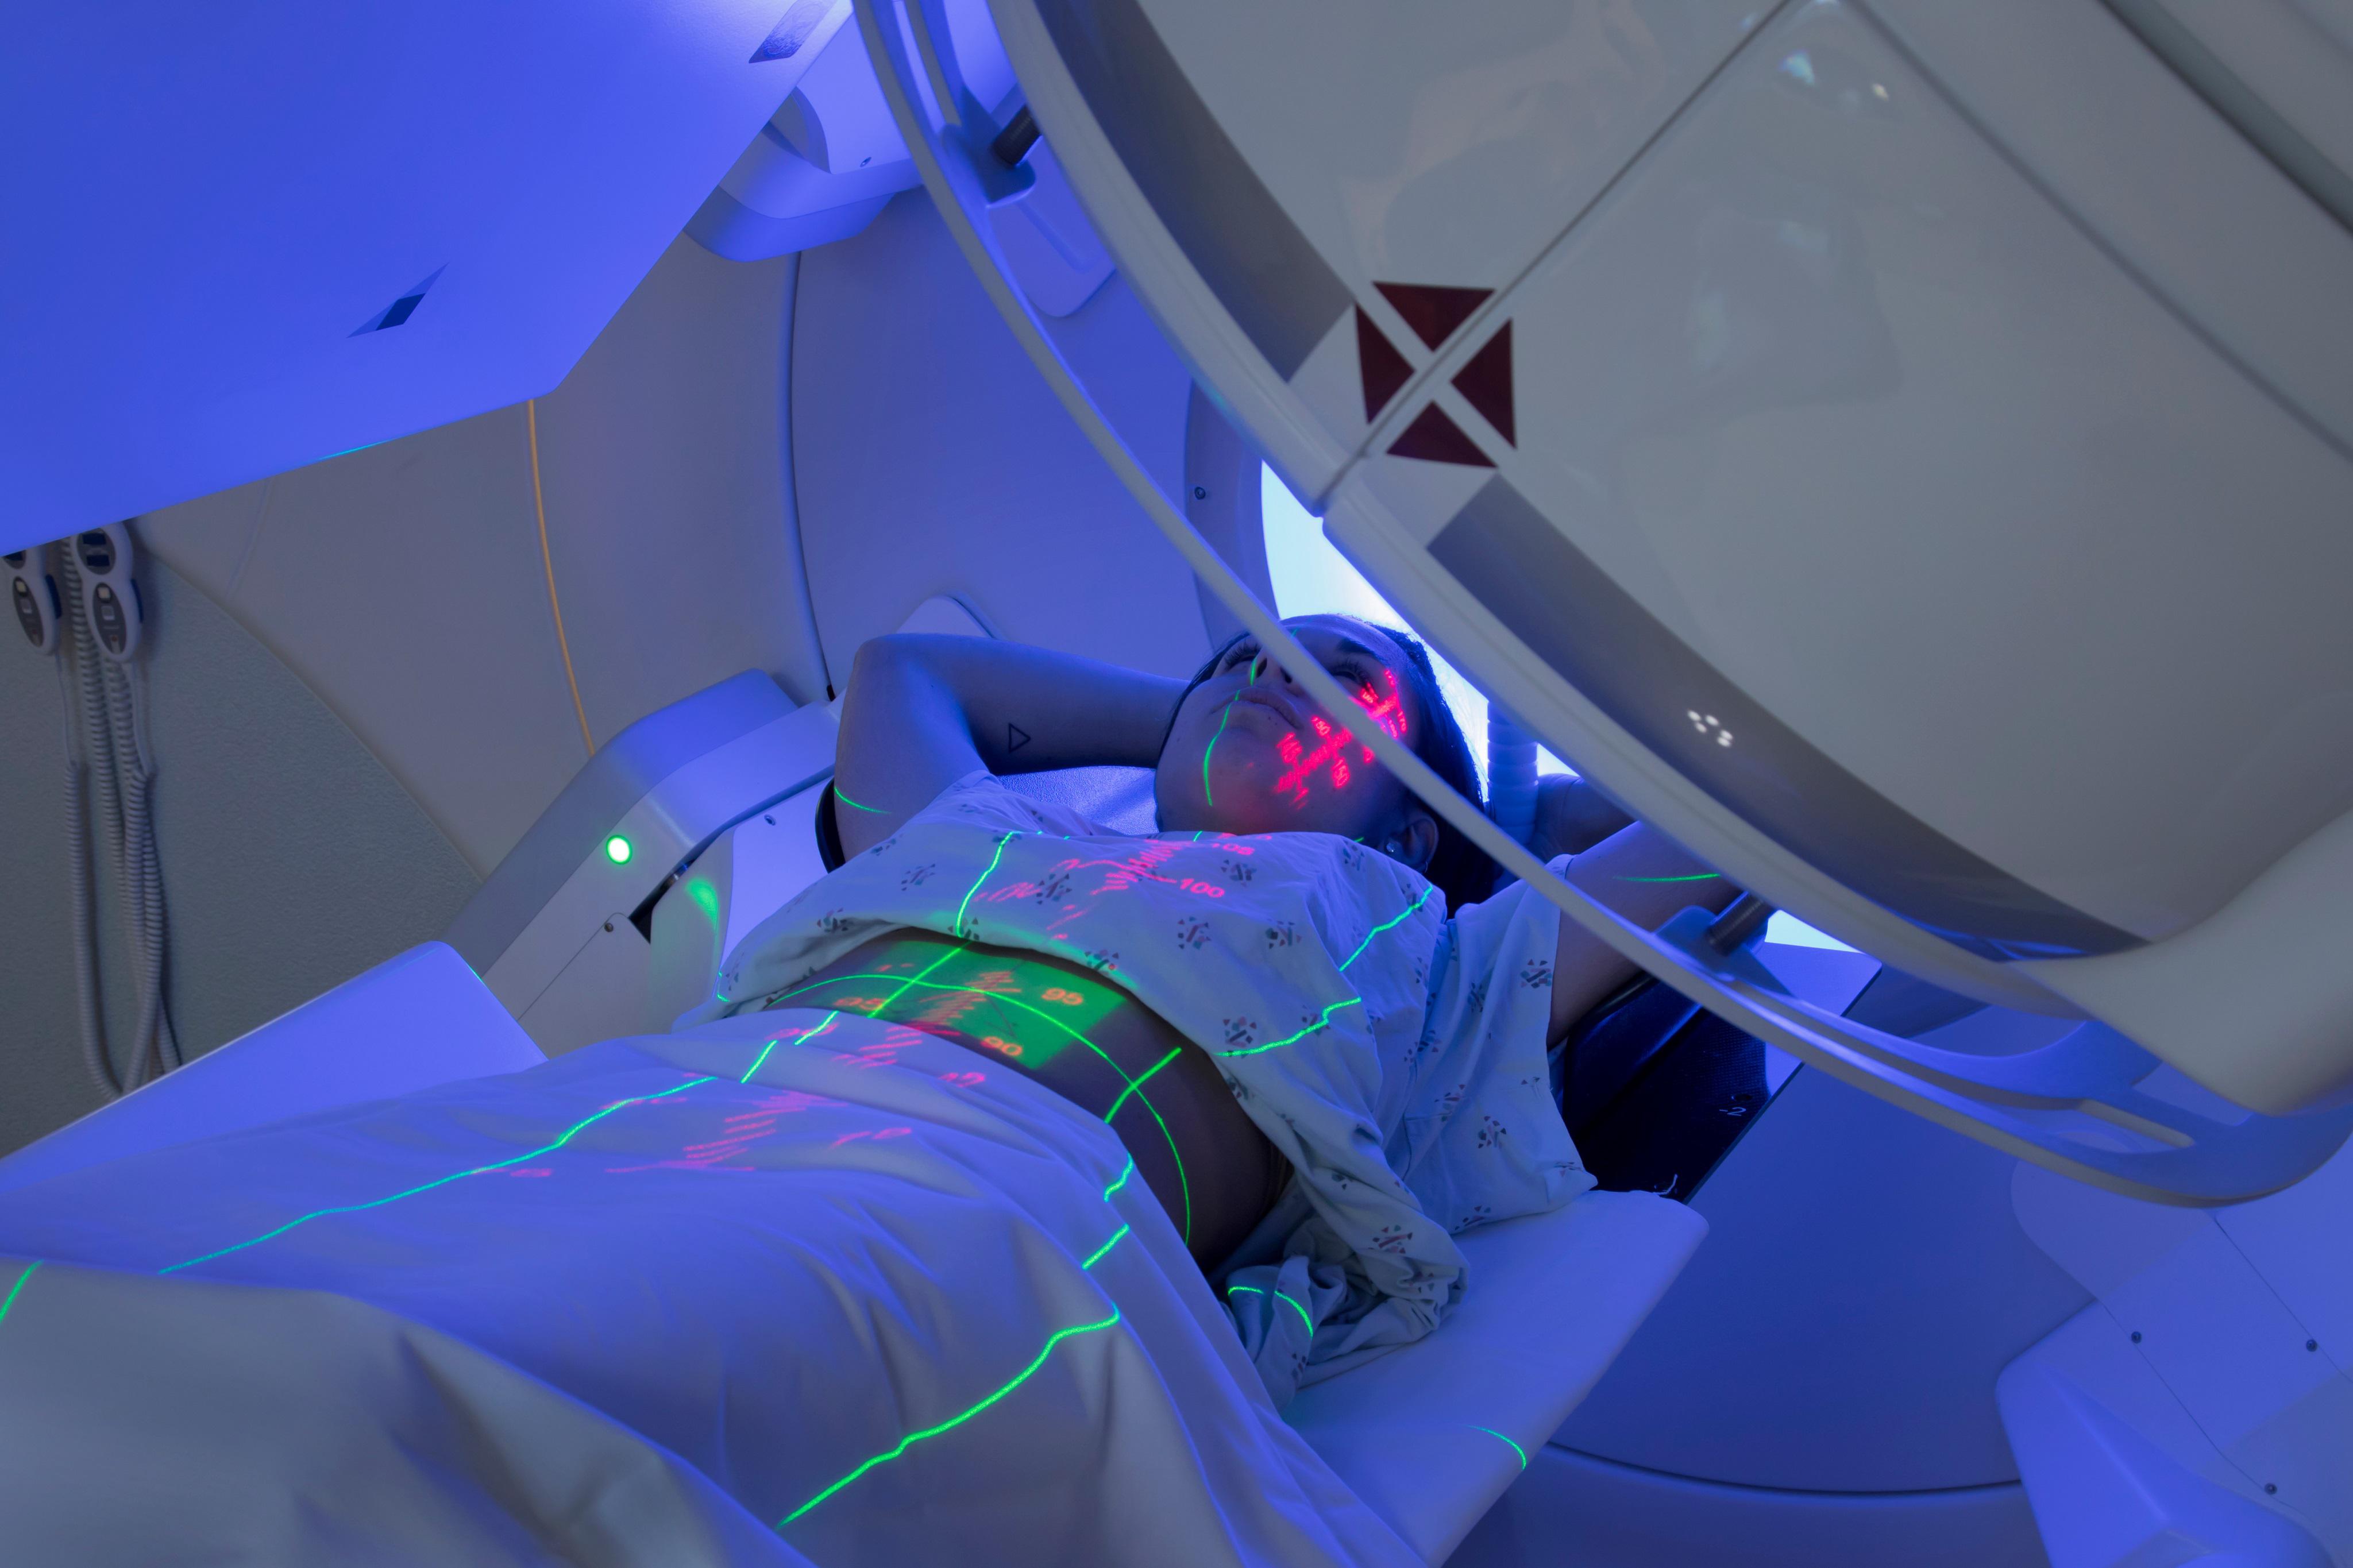 How long does radiation treatment take?